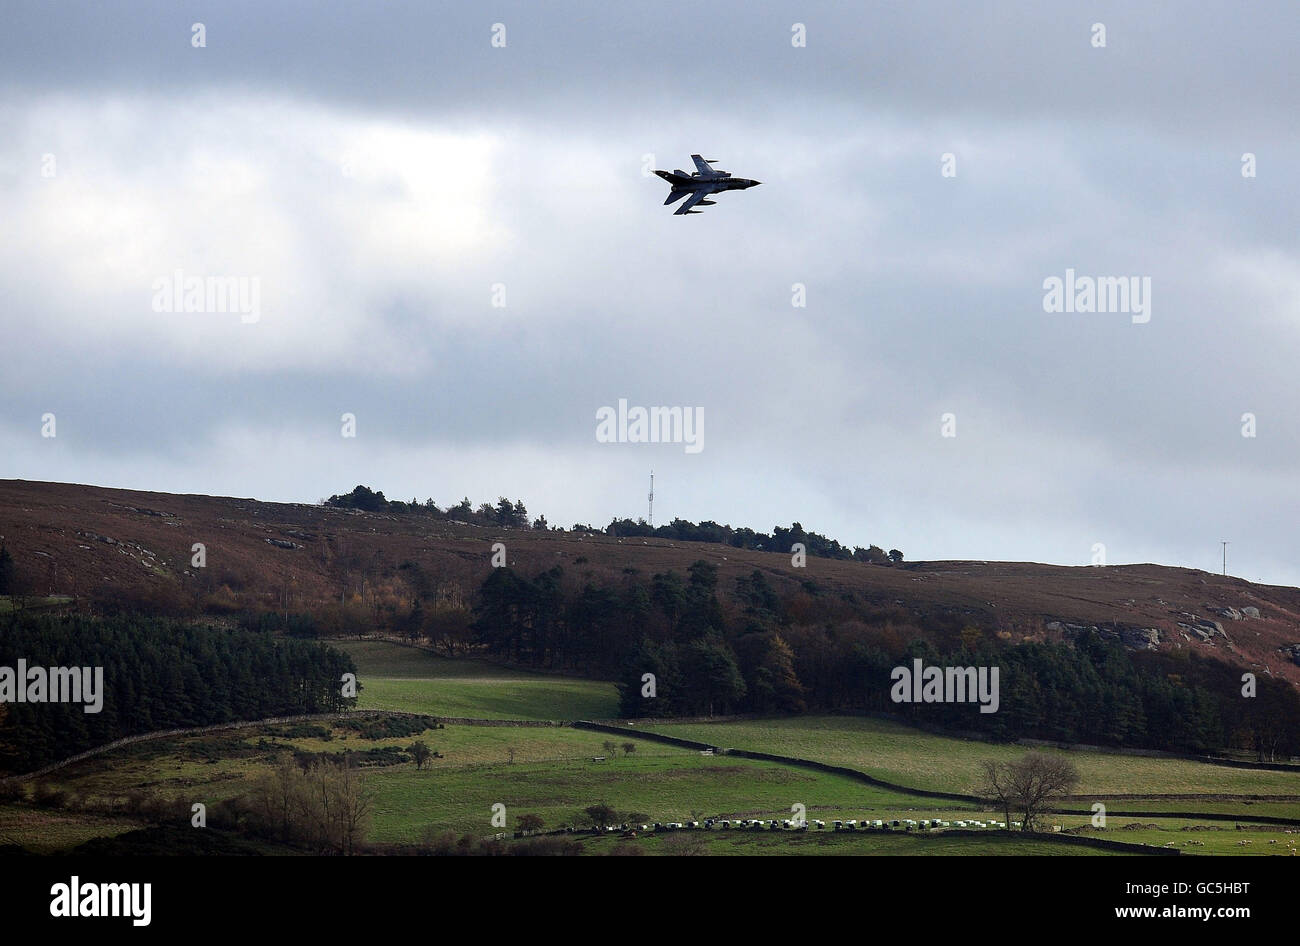 A Tornado takes part in a low flying exercise near Rothbury in Northumberland. Stock Photo